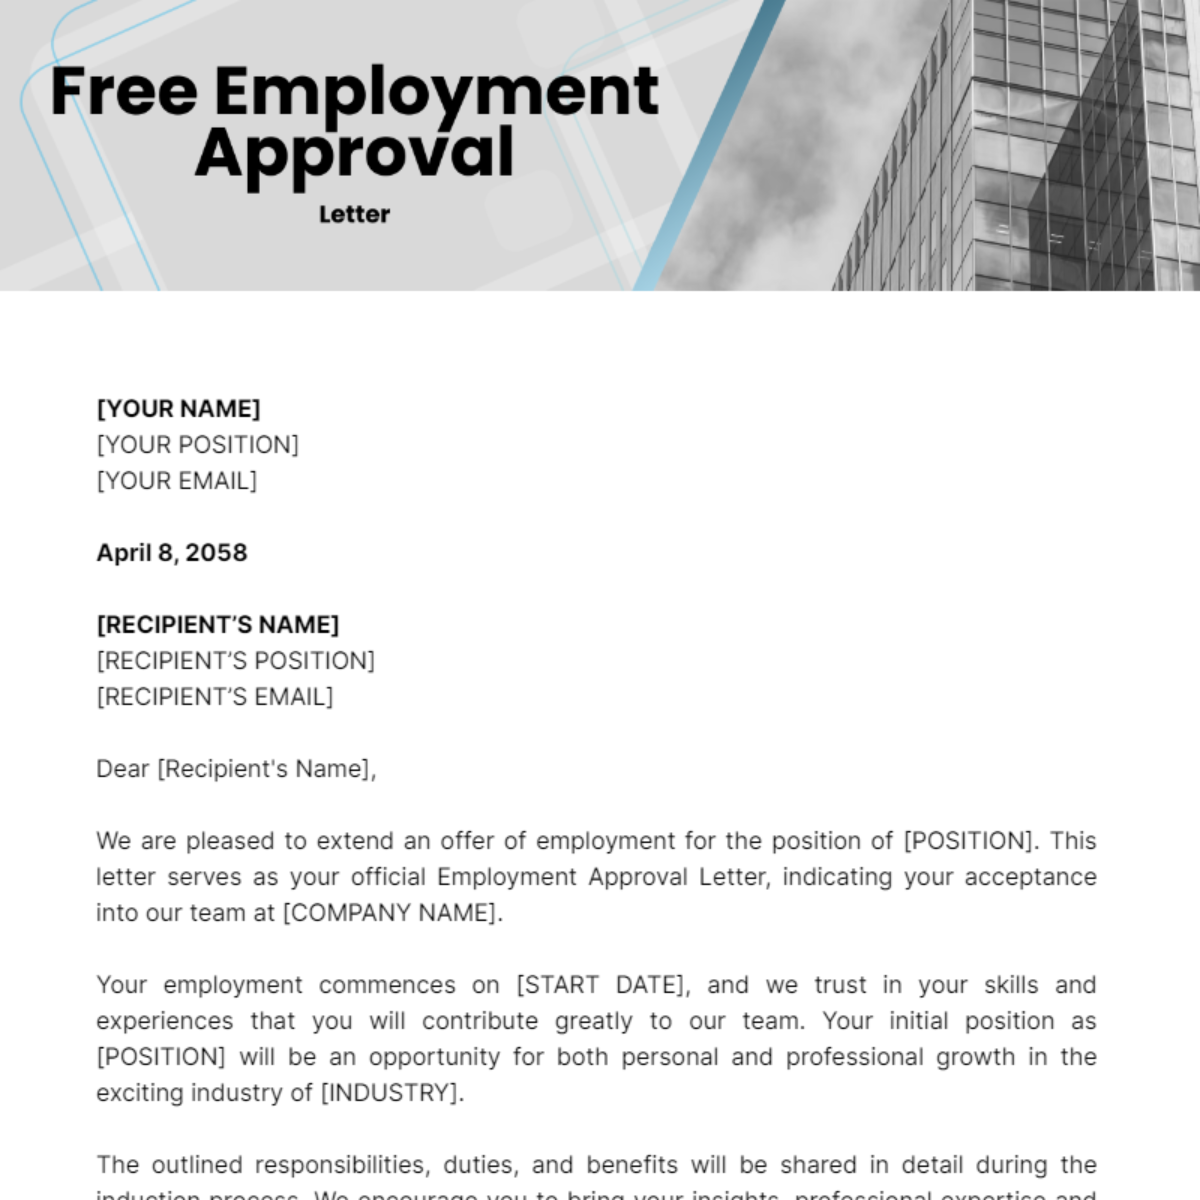 Employment Approval Letter Template